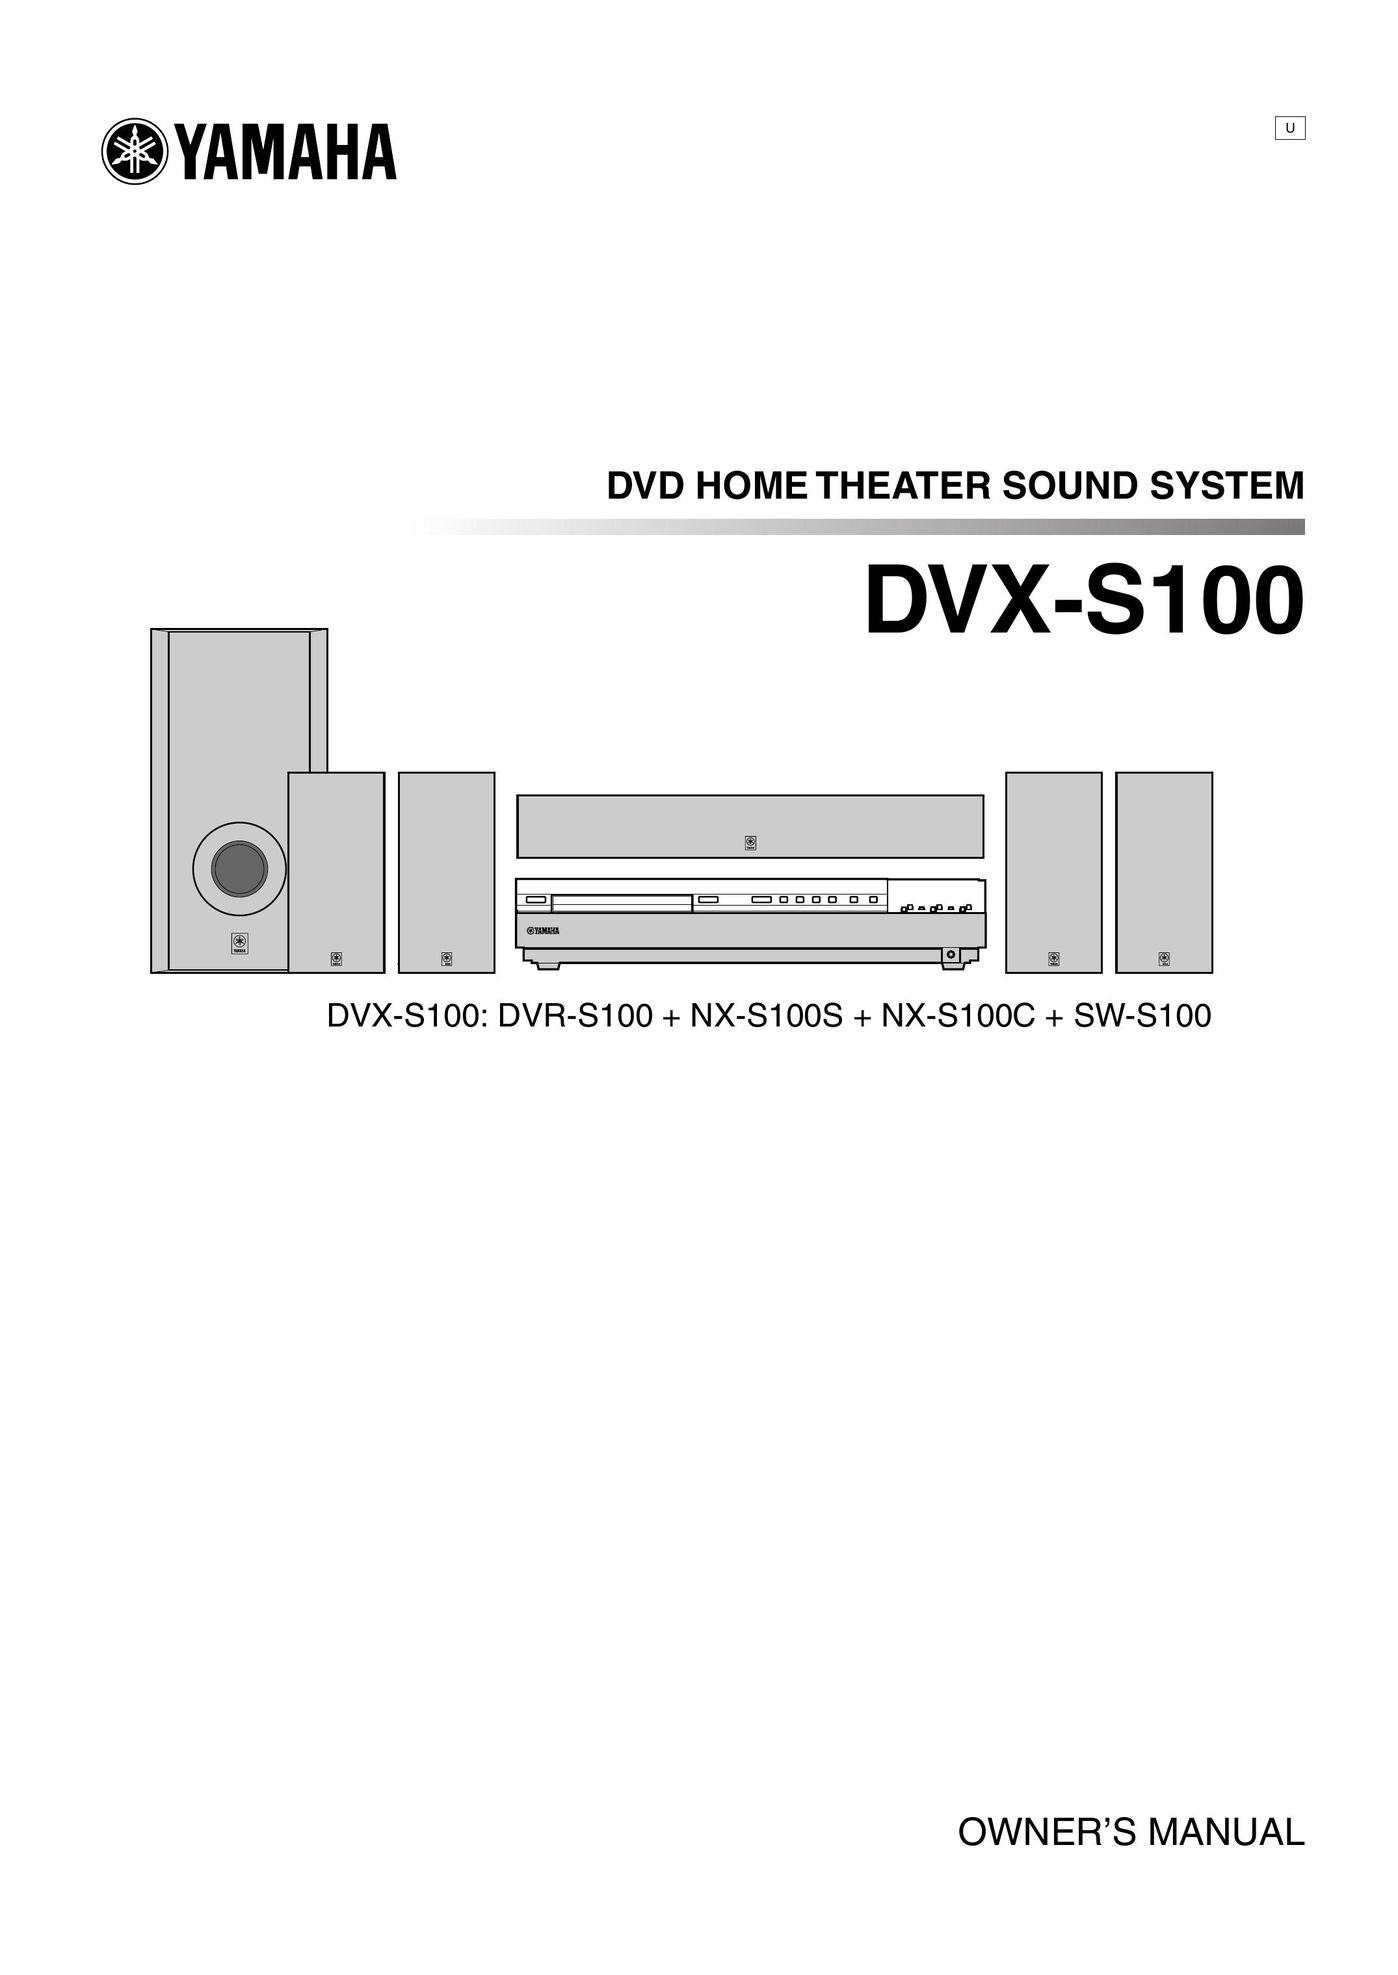 Yamaha DVX-S100 Home Theater System User Manual